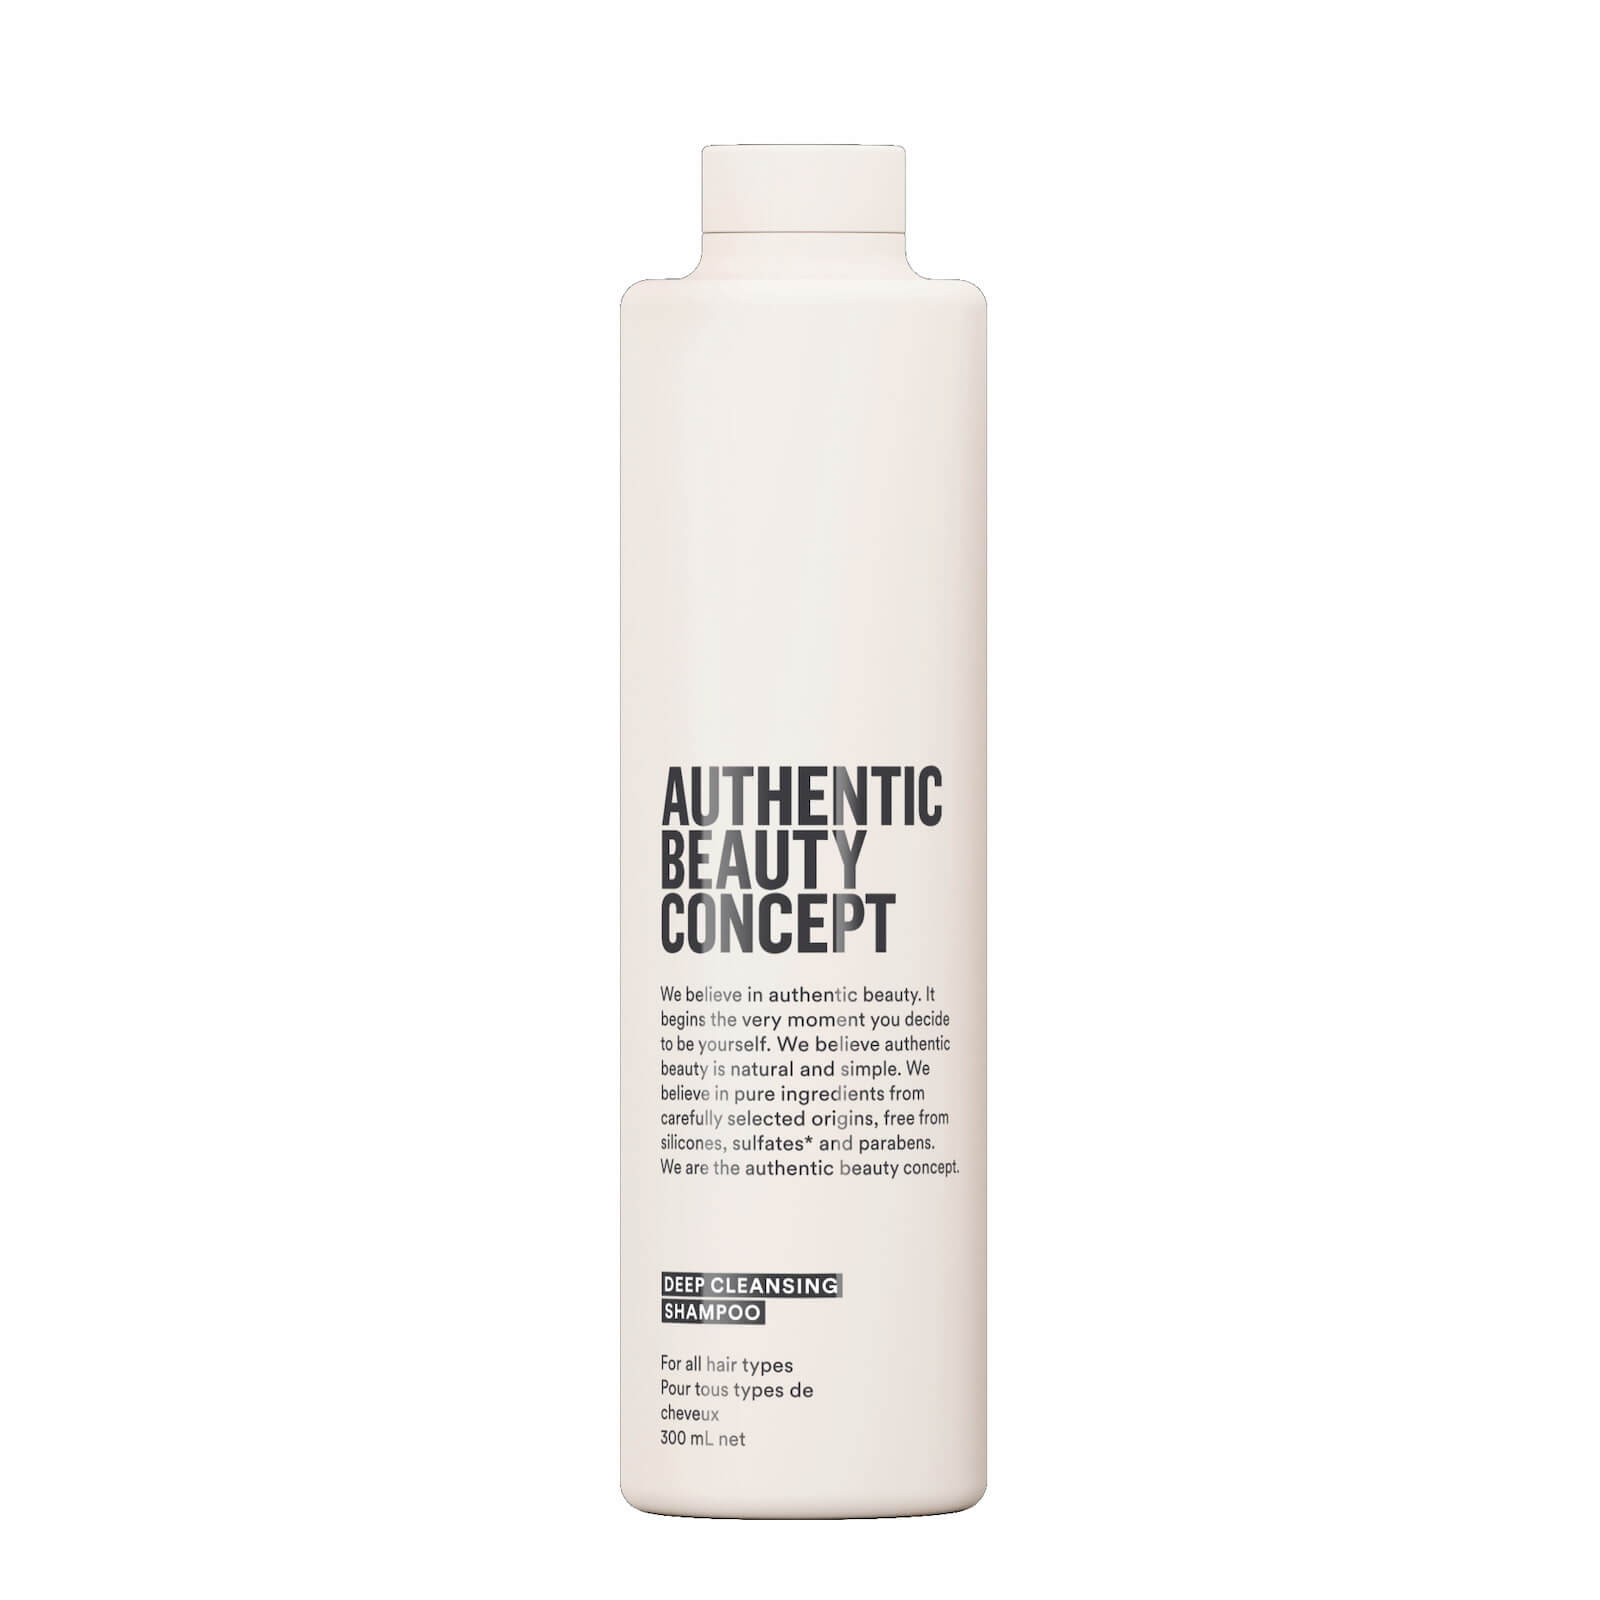 Authentic Beauty Concept Deep Cleansing Shampoo 300ml BUY ONLINE North  Laine Hair Co